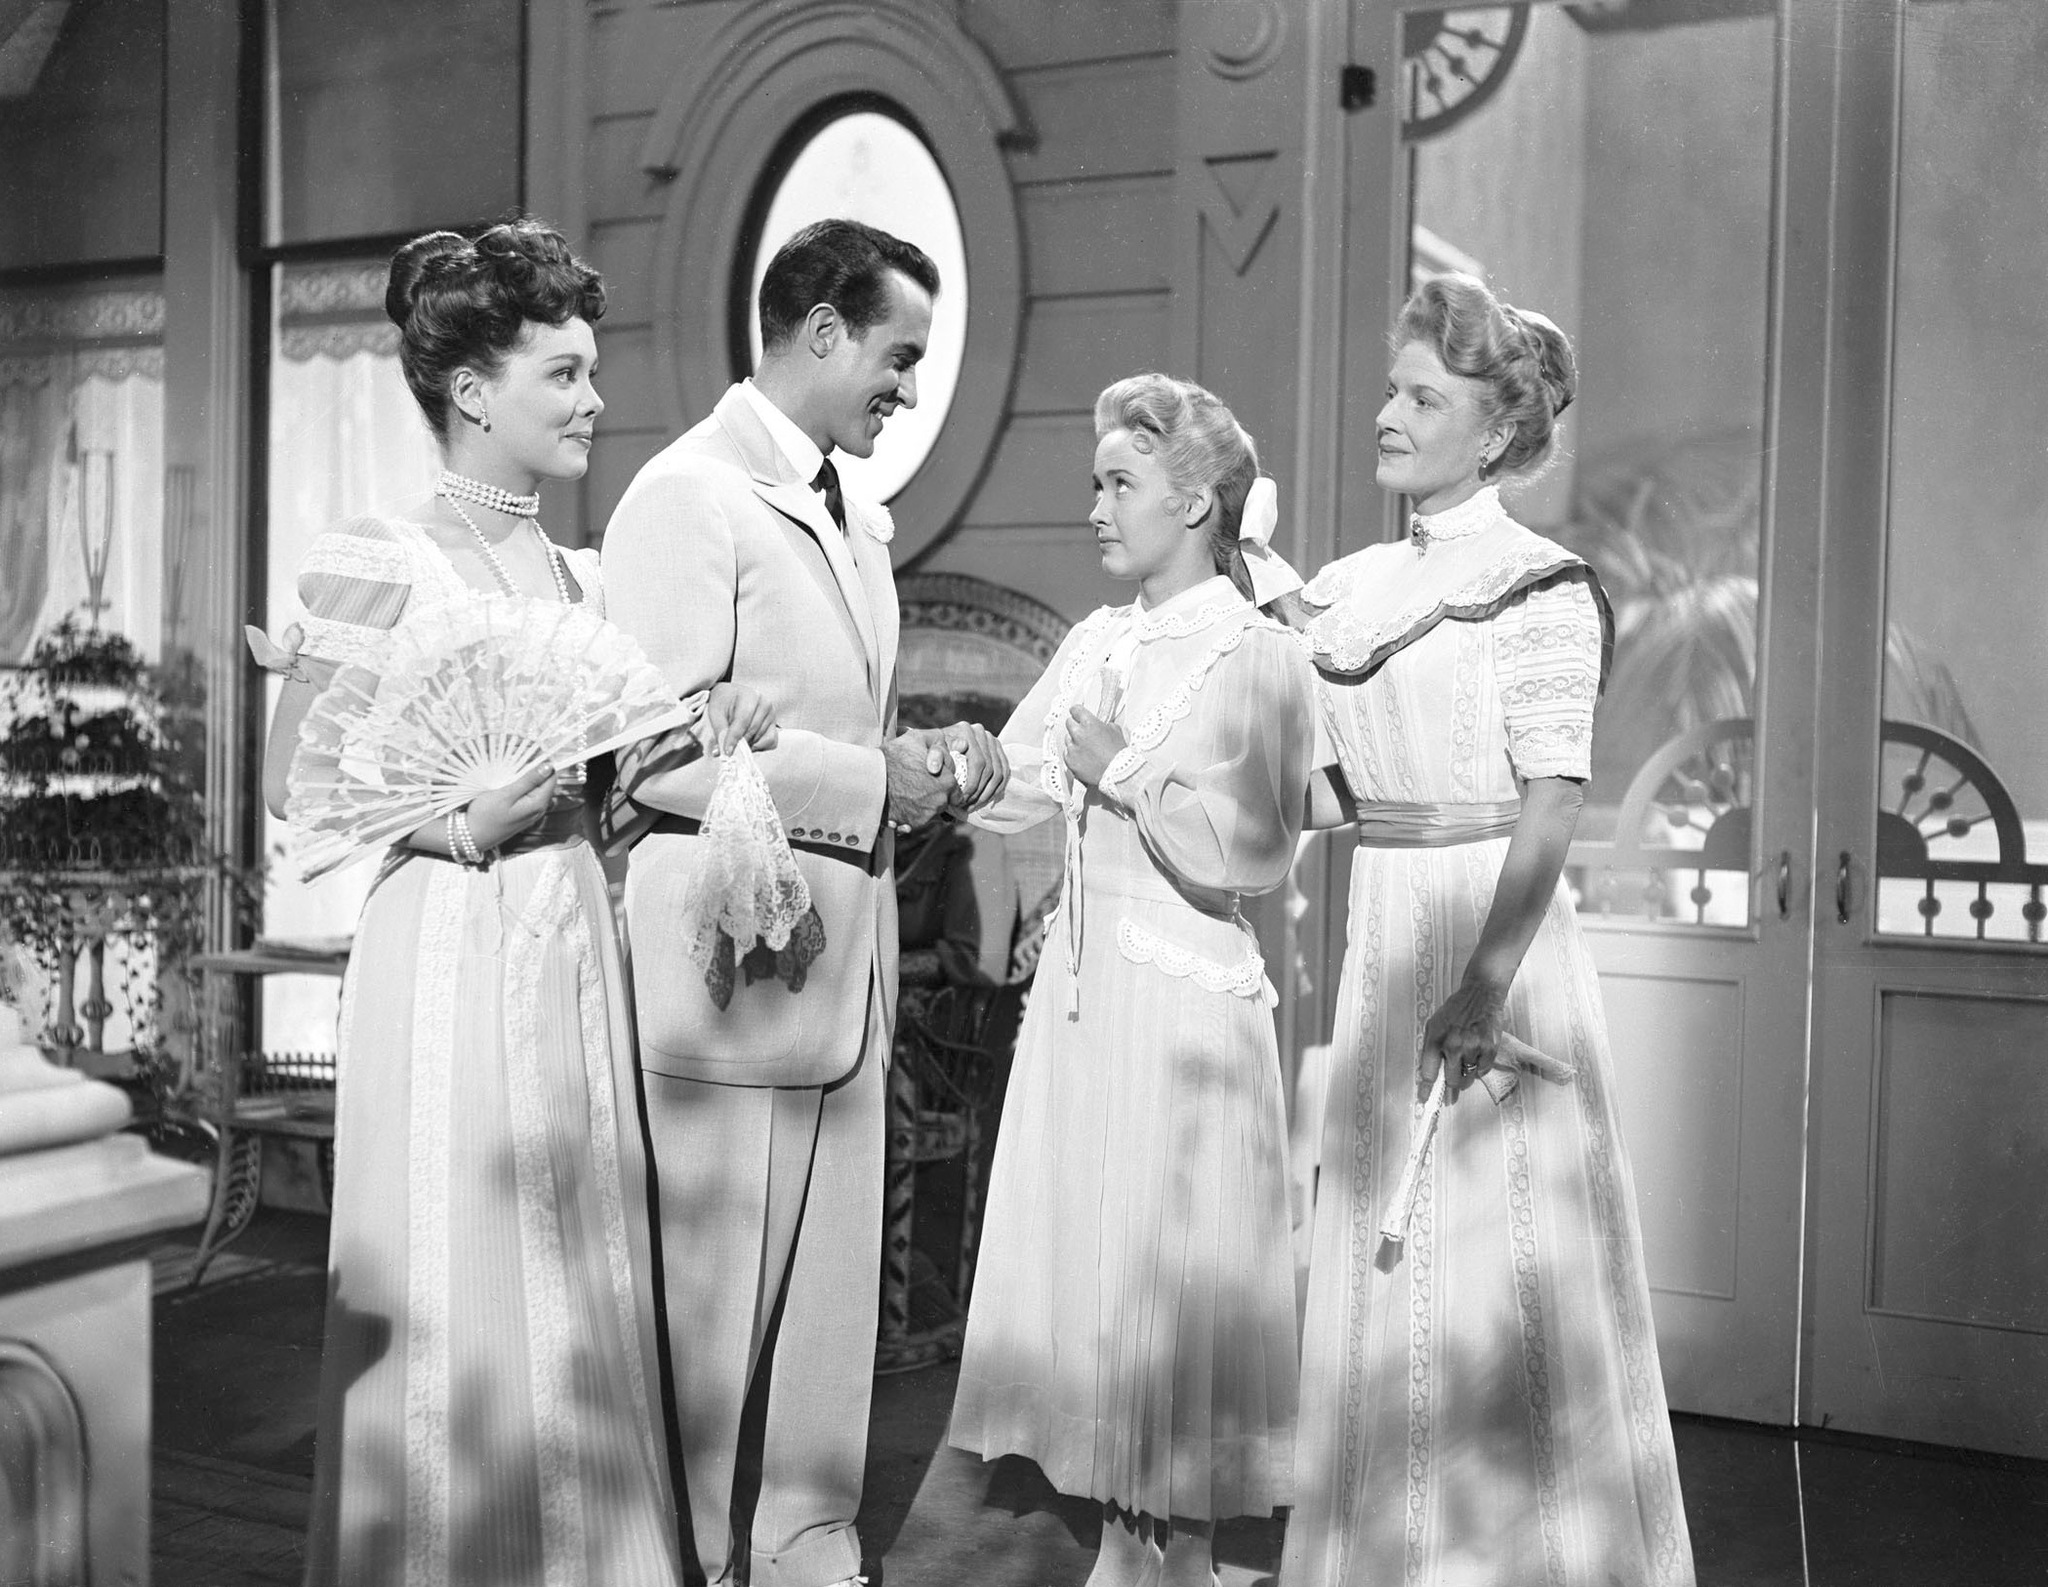 Ricardo Montalban, Jane Powell, Ann Harding, and Phyllis Kirk in Two Weeks with Love (1950)